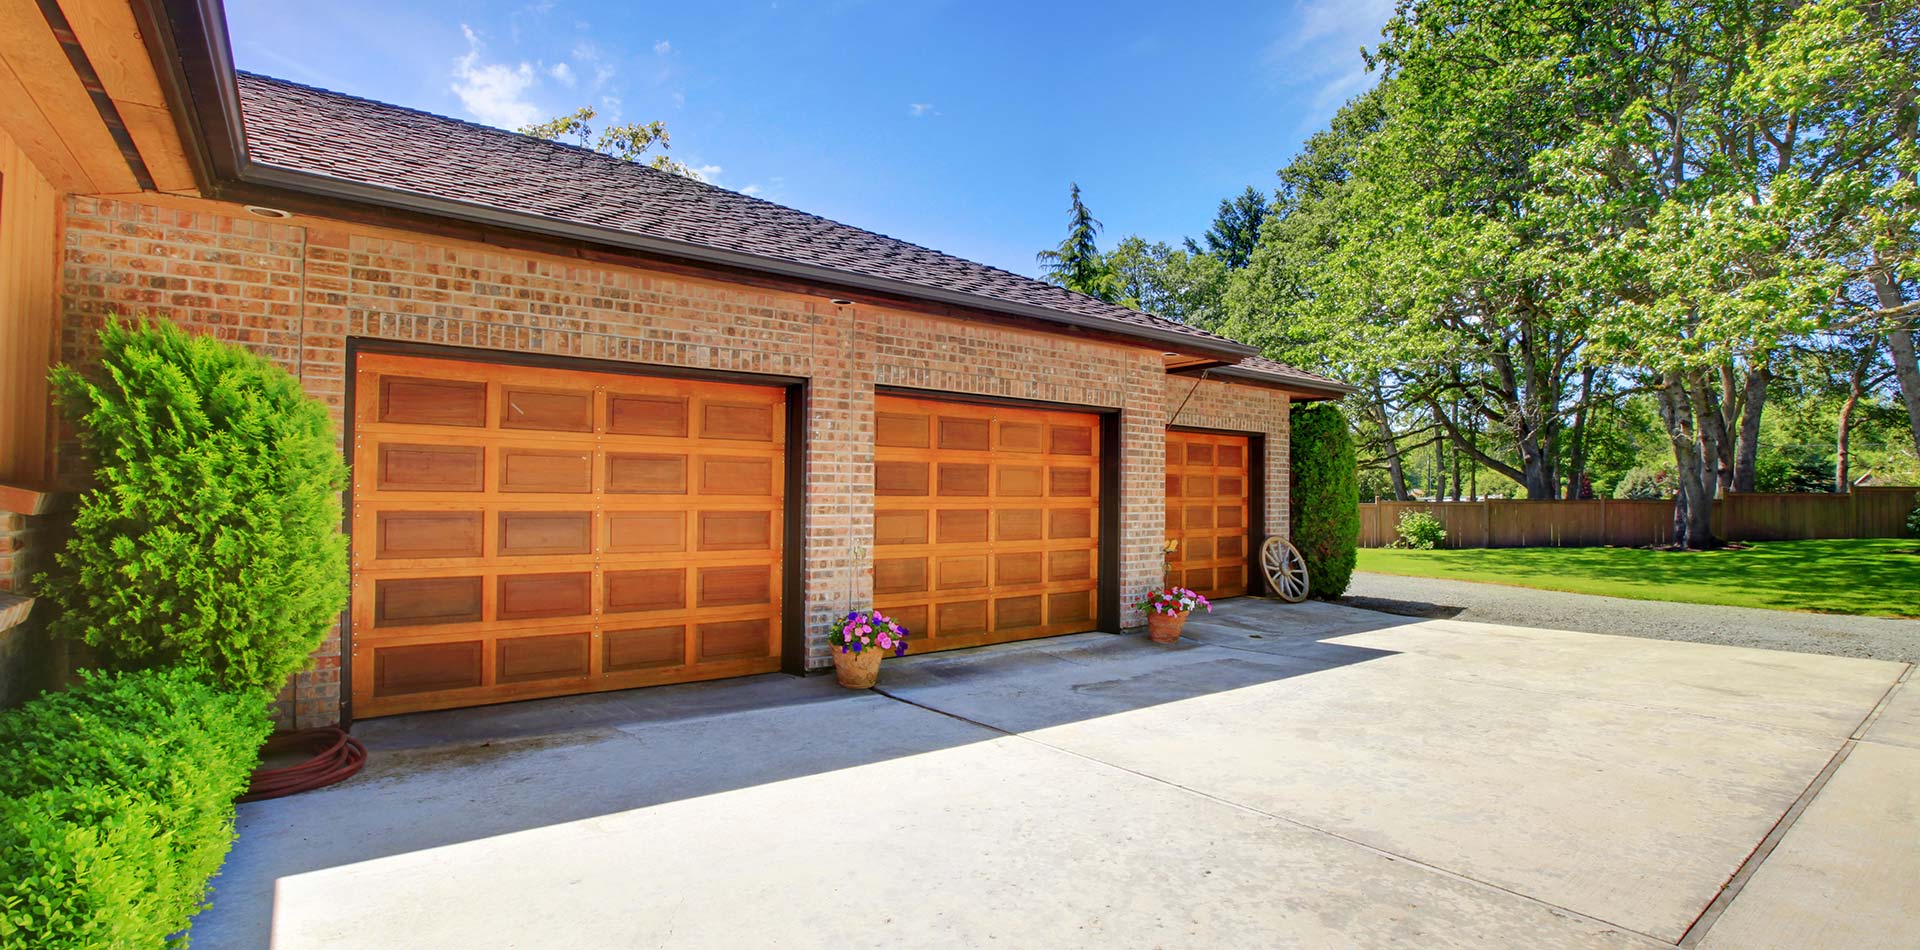 Farm house with large three car garage with nice doors